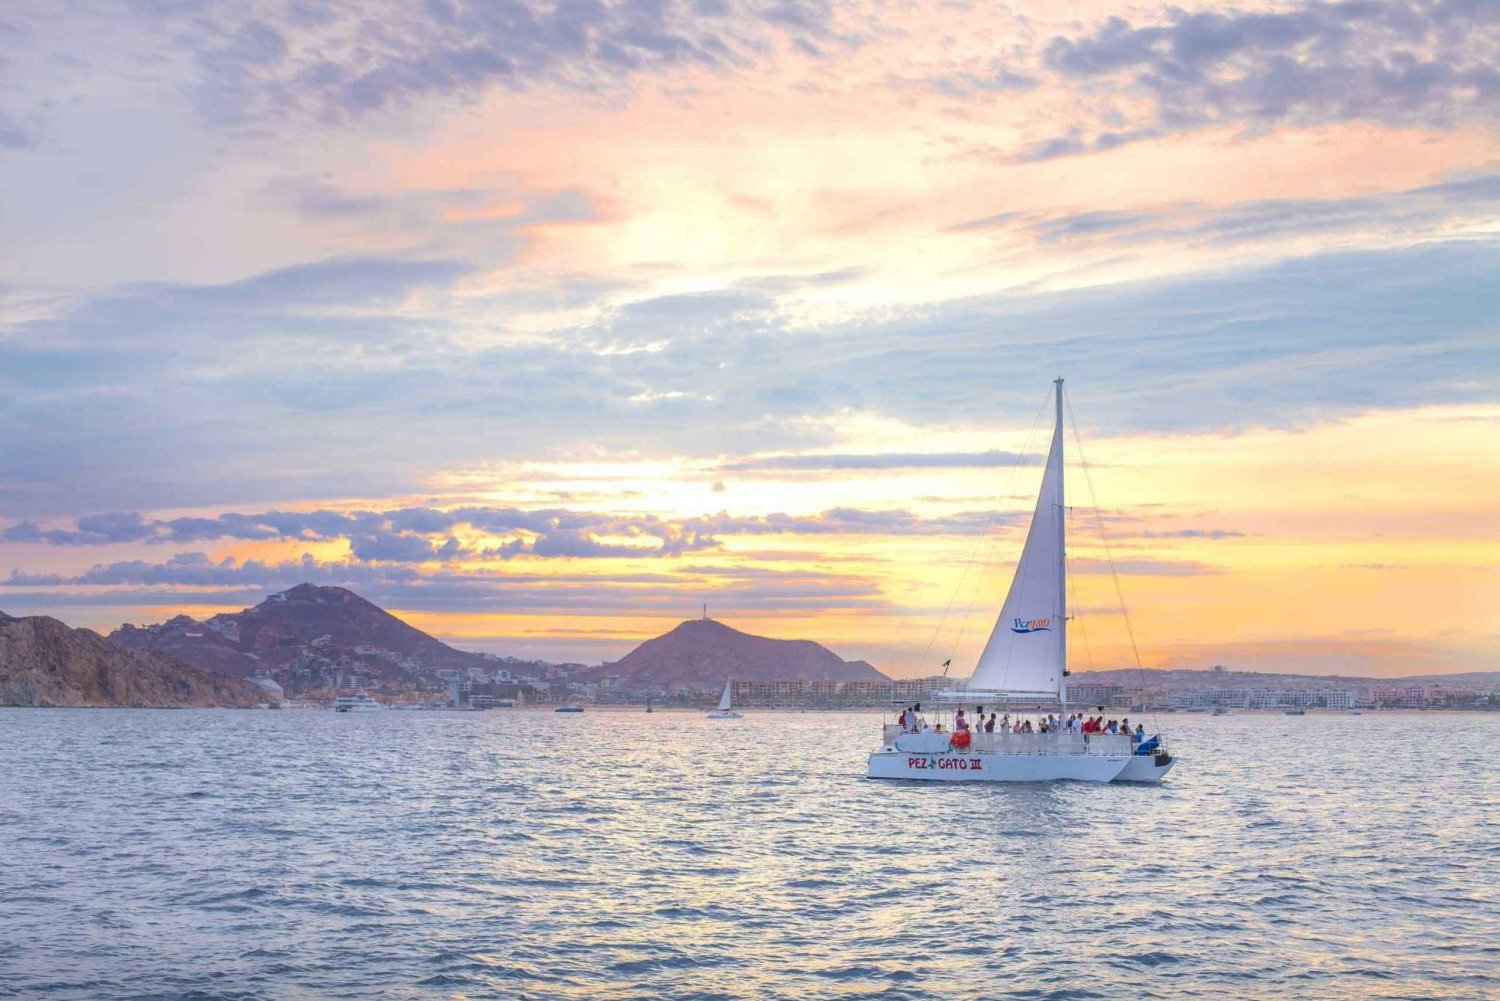 Cabo San Lucas: Sunset Party Cruise with Open Bar